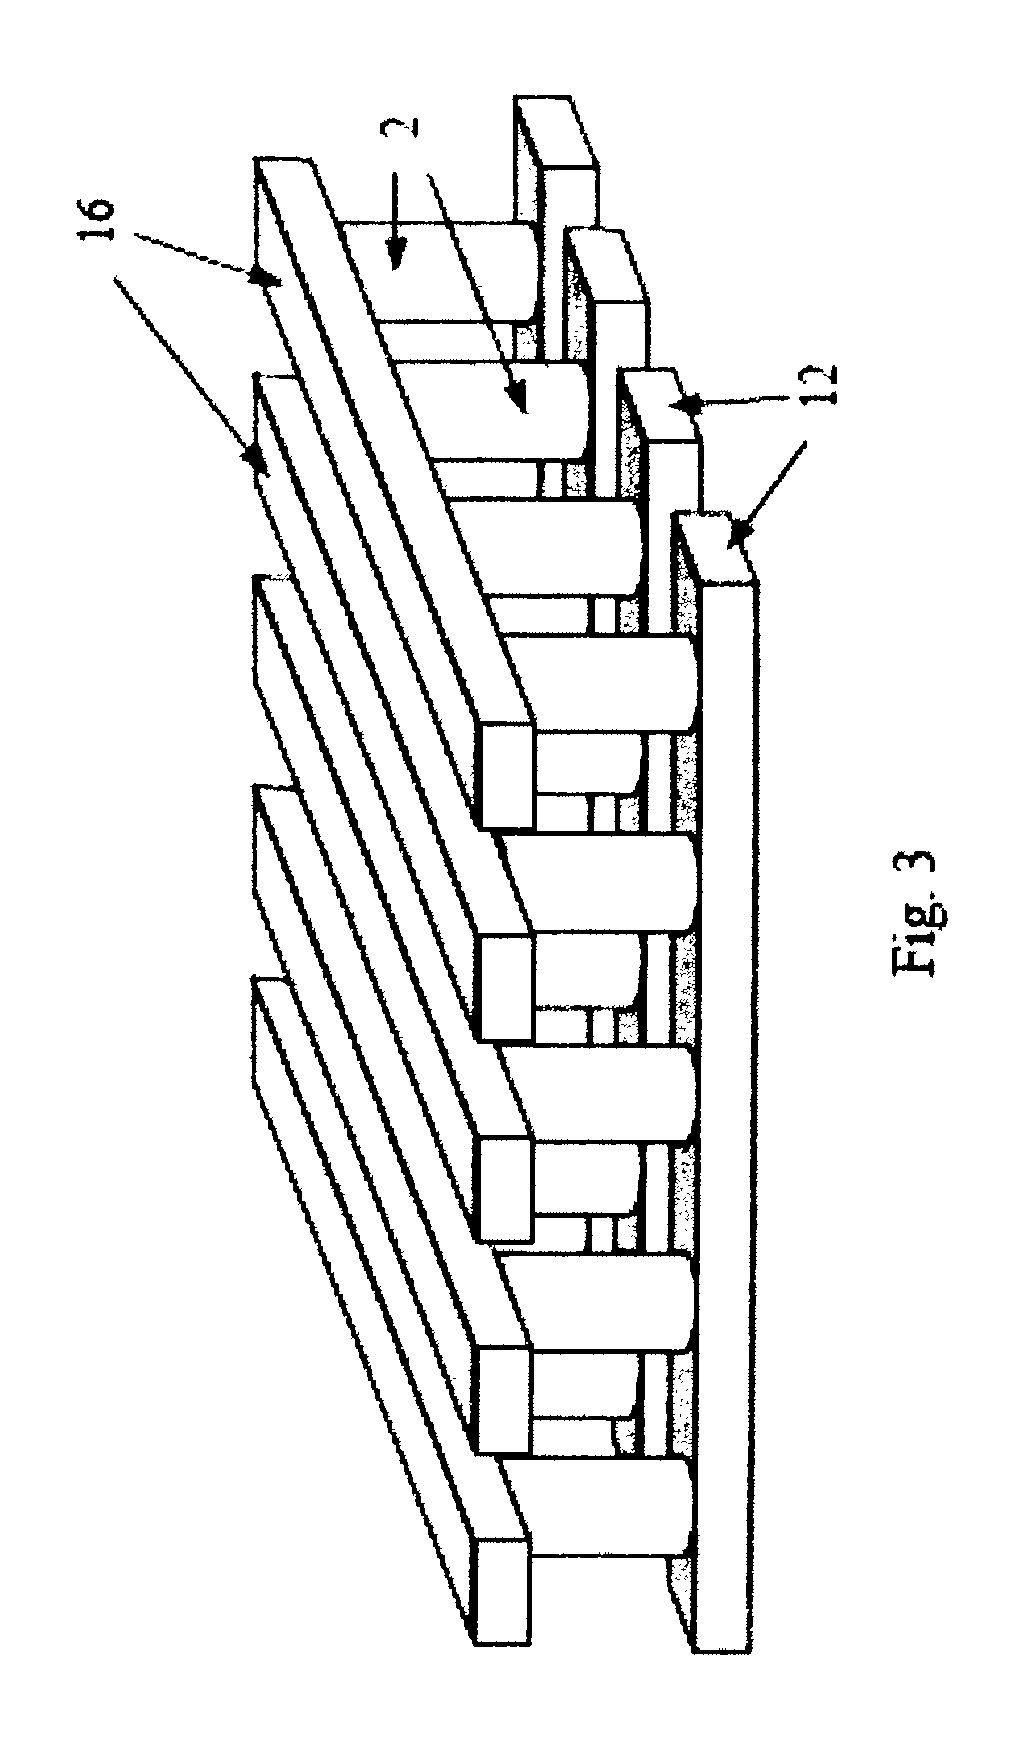 Method of making a diode read/write memory cell in a programmed state